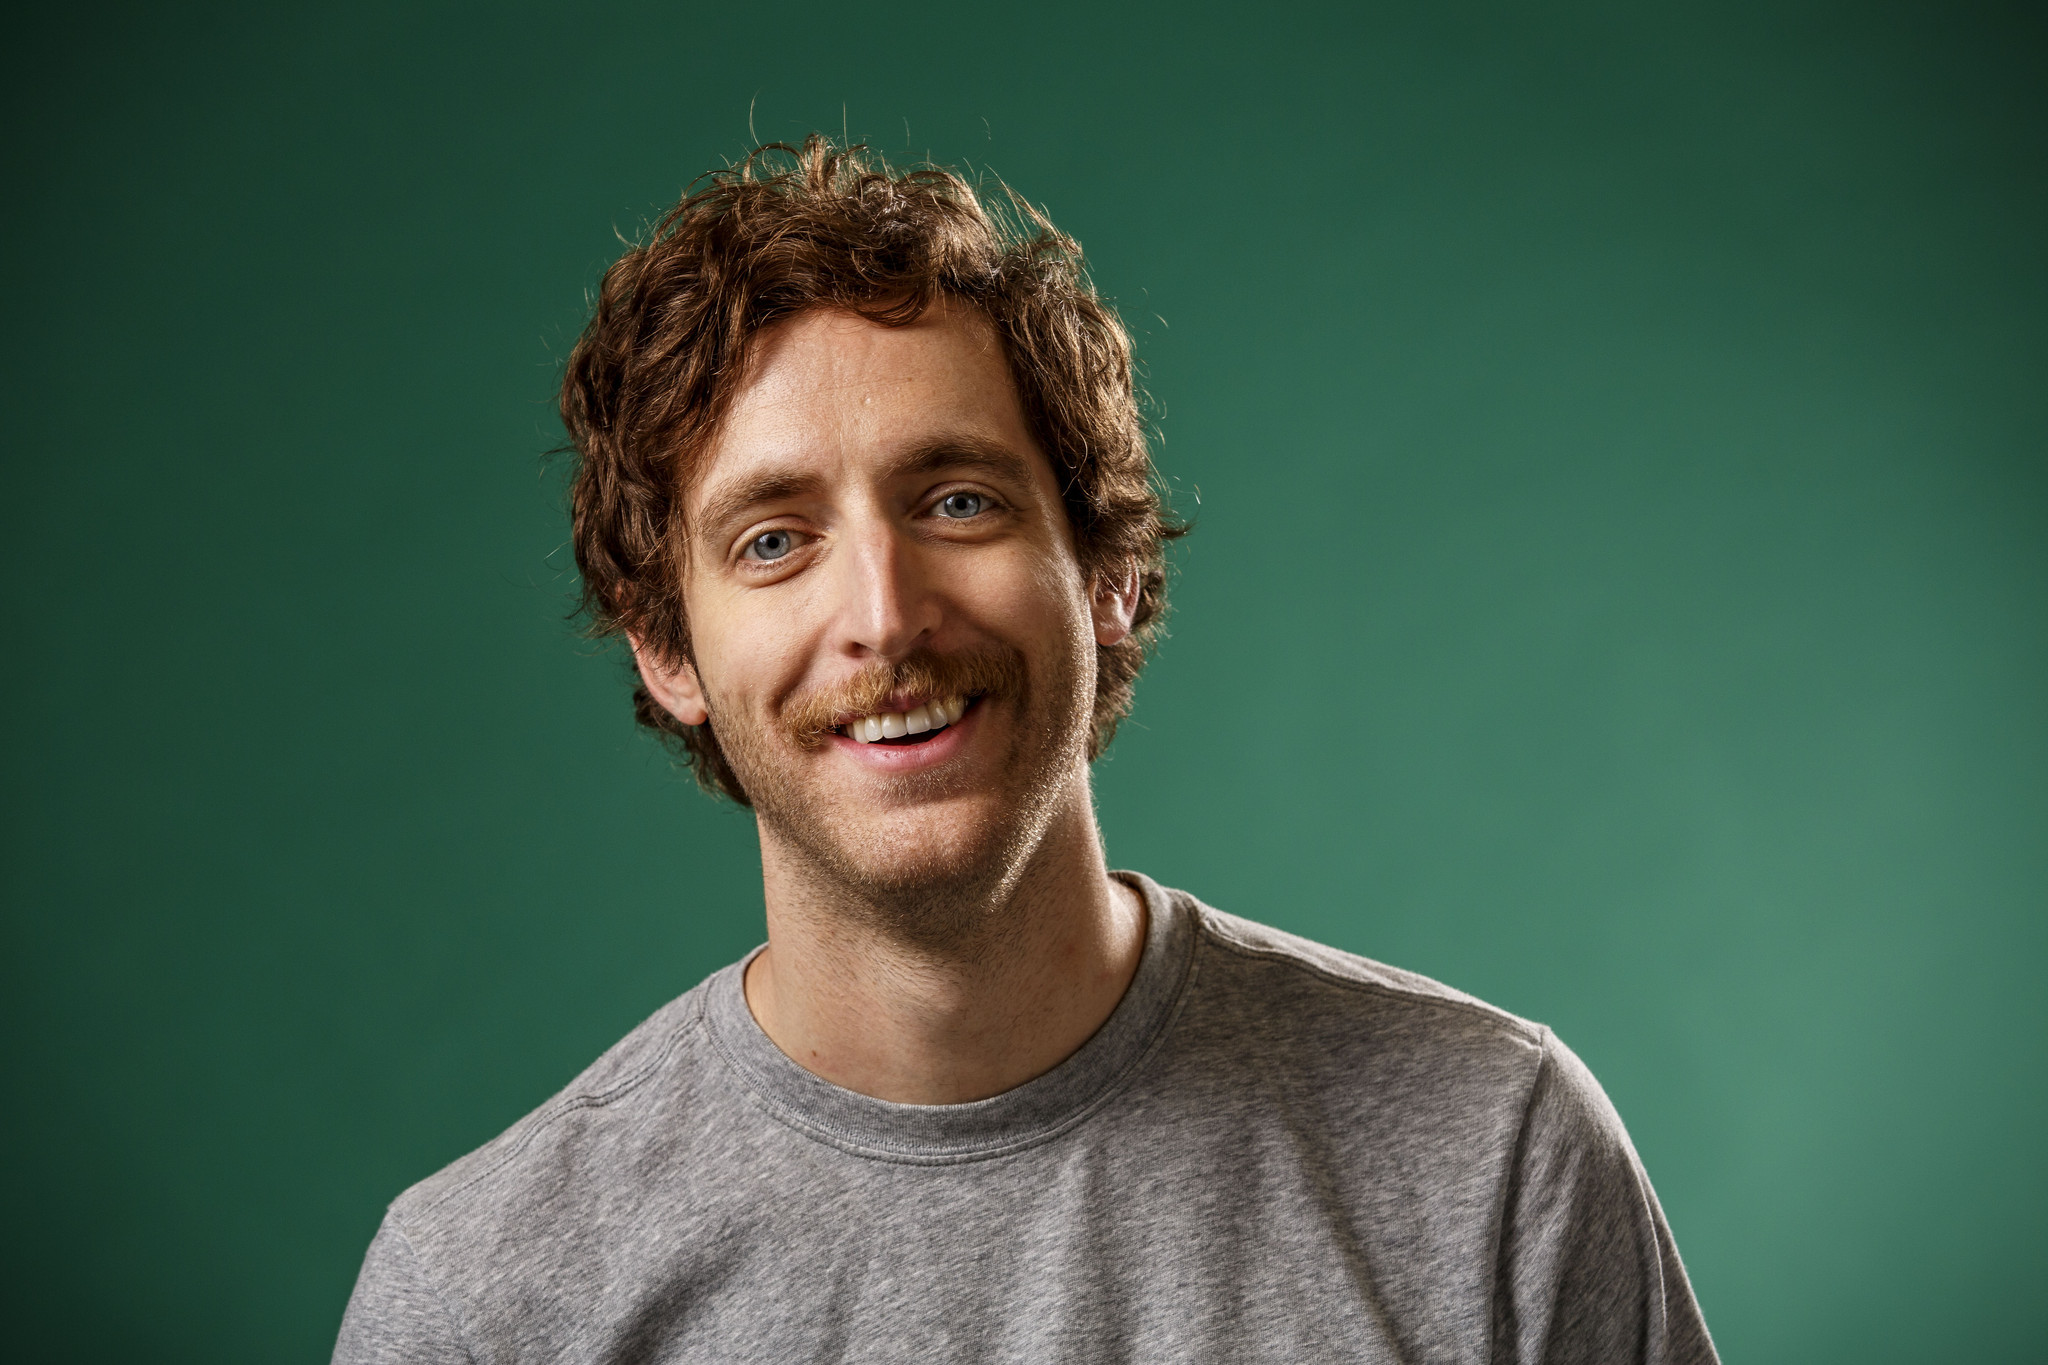 Join a chat with 'Silicon Valley's' Thomas Middleditch on Tuesday - The Morning Call